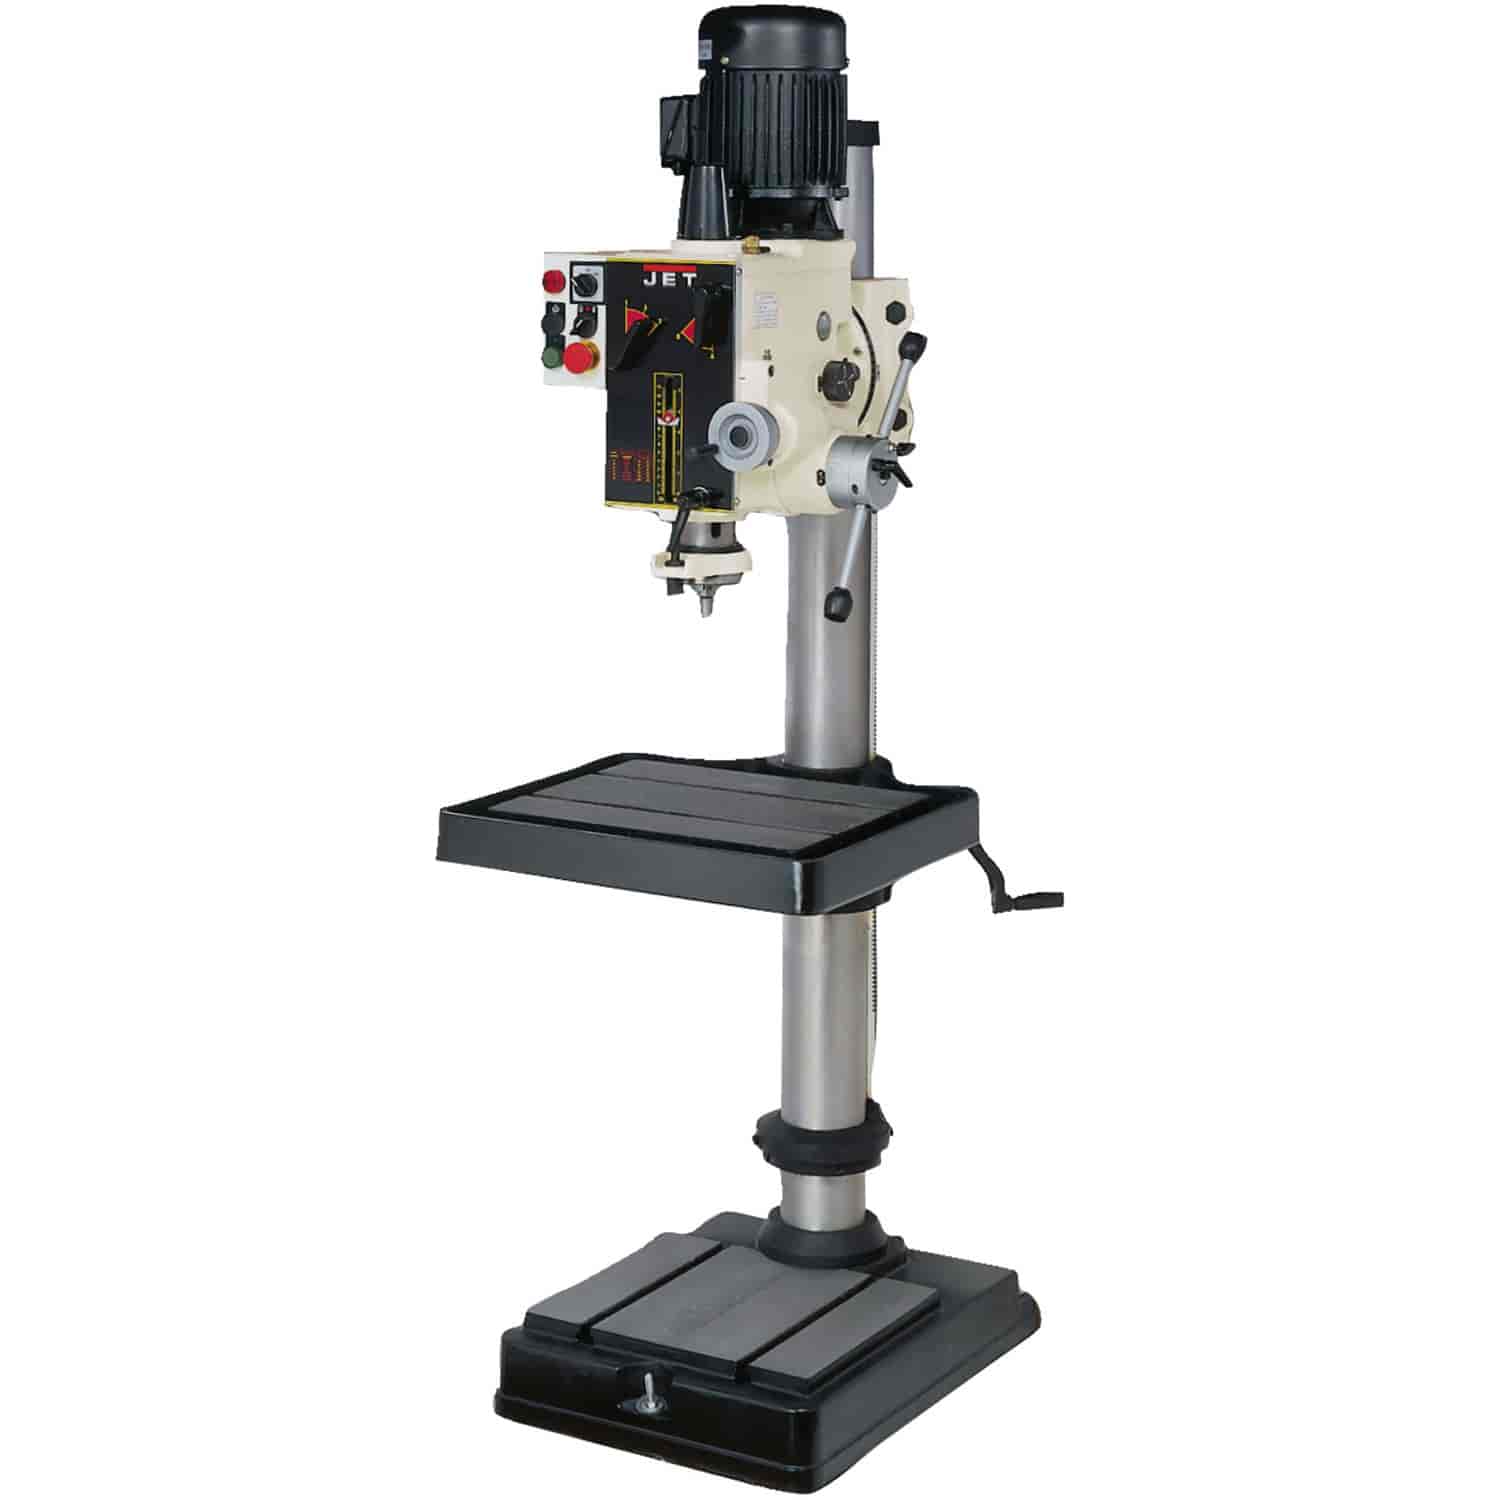 GHD-20PFT 20 Gear Head Tapping Drill Press With Power Down feed 230V 3Ph